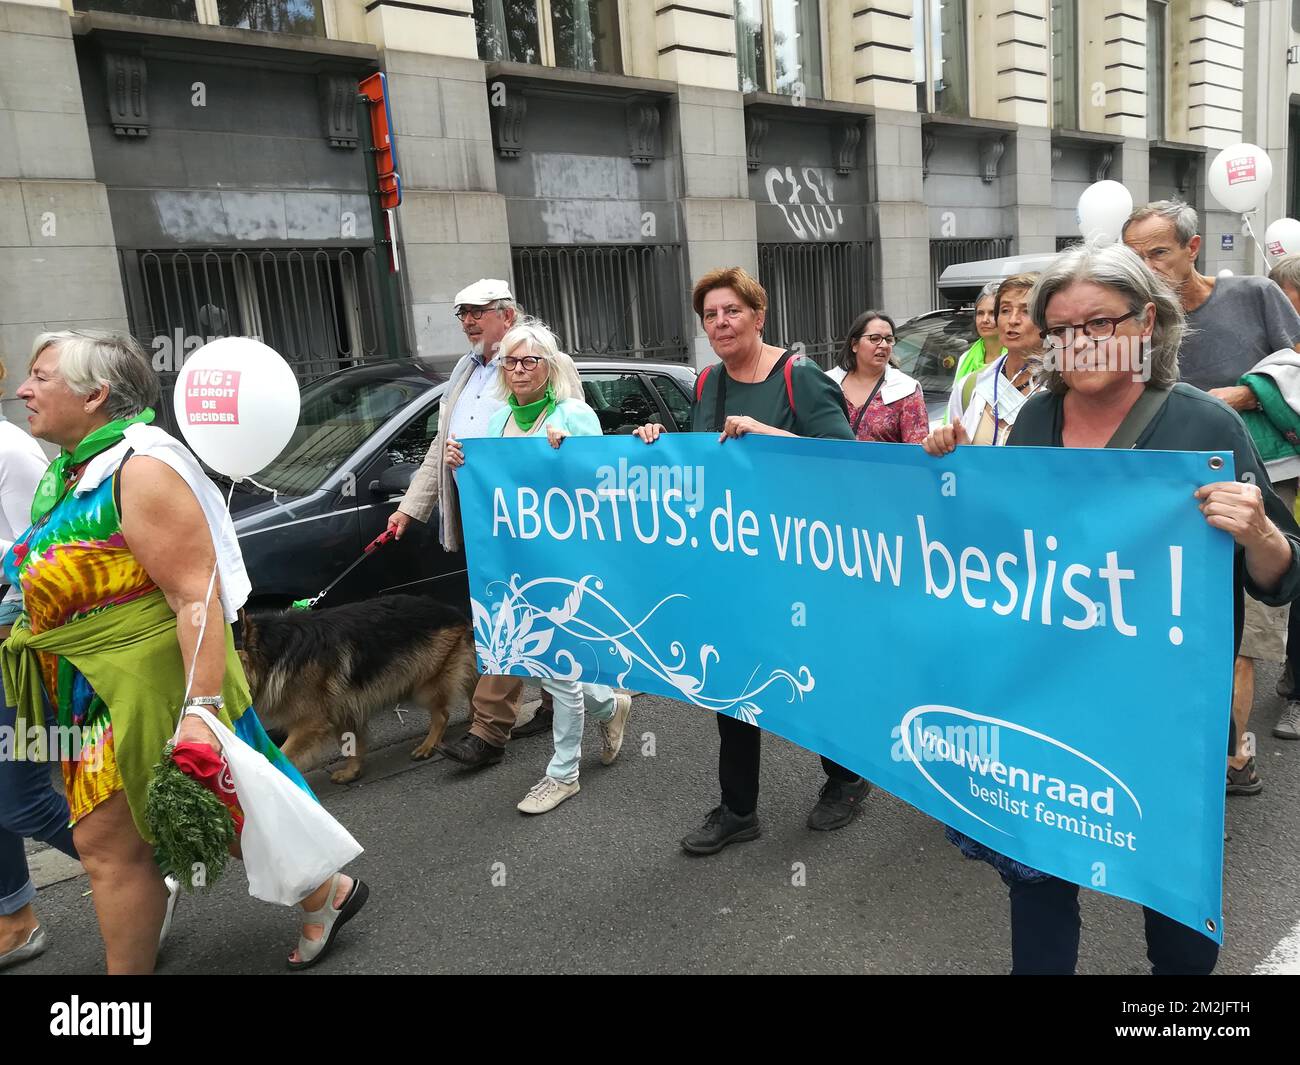 Women carry a banner that reads 'Abortus: de vrouw beslist' (Abortion, the woman decides), during a protest pro abortion, organised by the 'Collectif des 350', in Brussels, Sunday 09 September 2018. The participants demand that abortion is properly depenalised and becomes a right for women. They claim the upcoming change of the abortion law is not going far enough. BELGA PHOTO ANTONY GEVAERT  Stock Photo